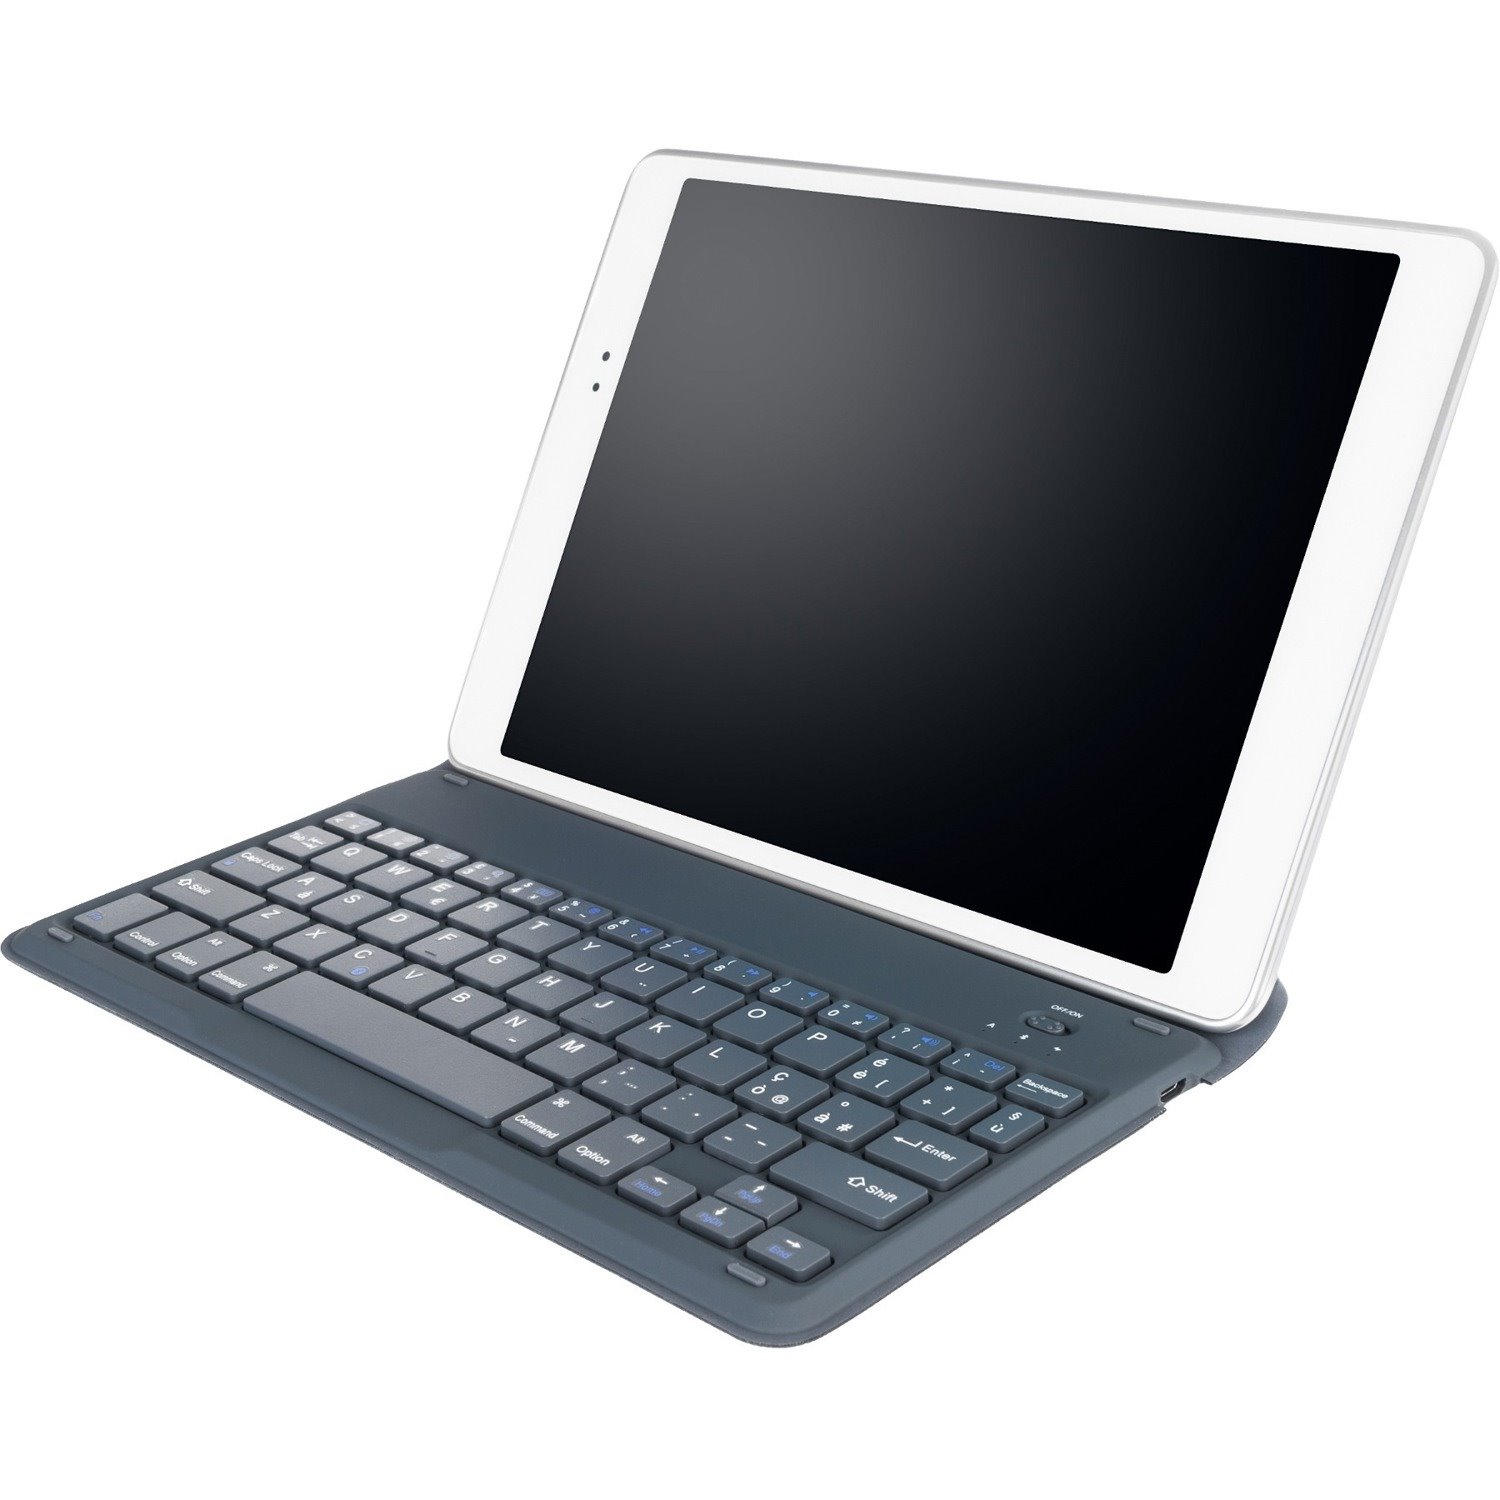 Tucano Keyboard/Cover Case for 25.4 cm (10") Tablet, Smartphone - Blue